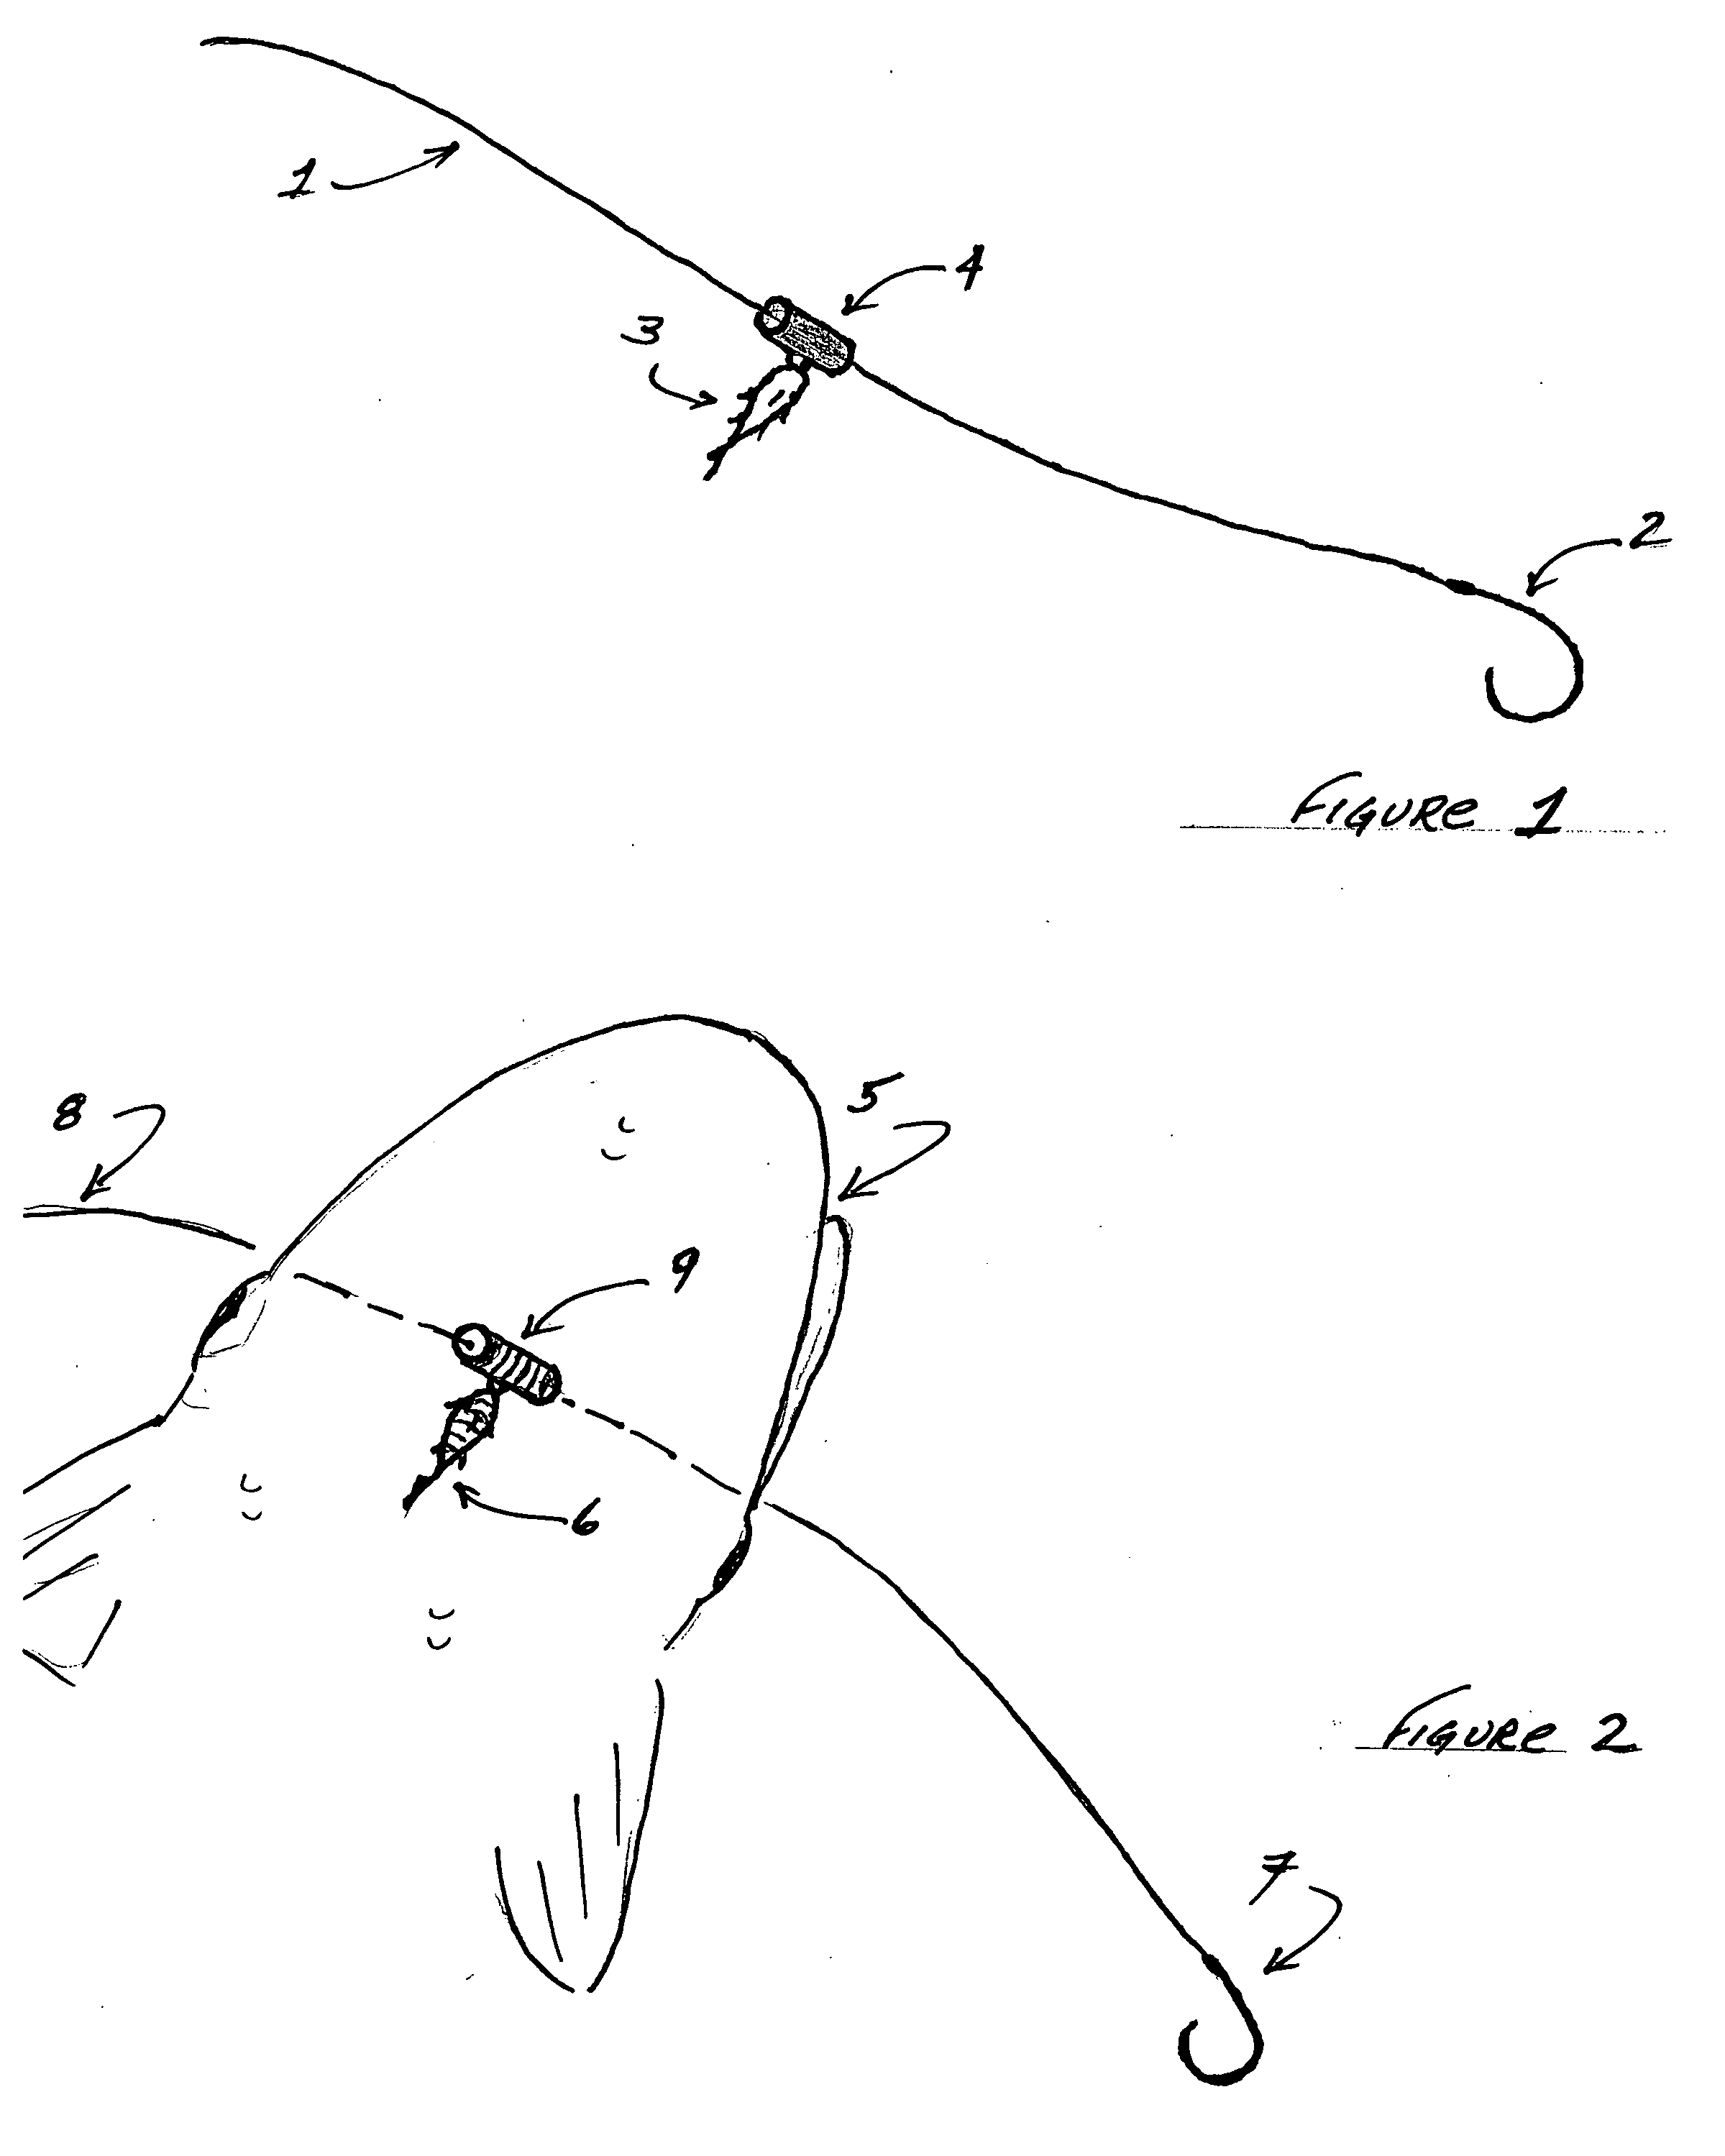 Method and apparatus for long line and recreational bait fishing